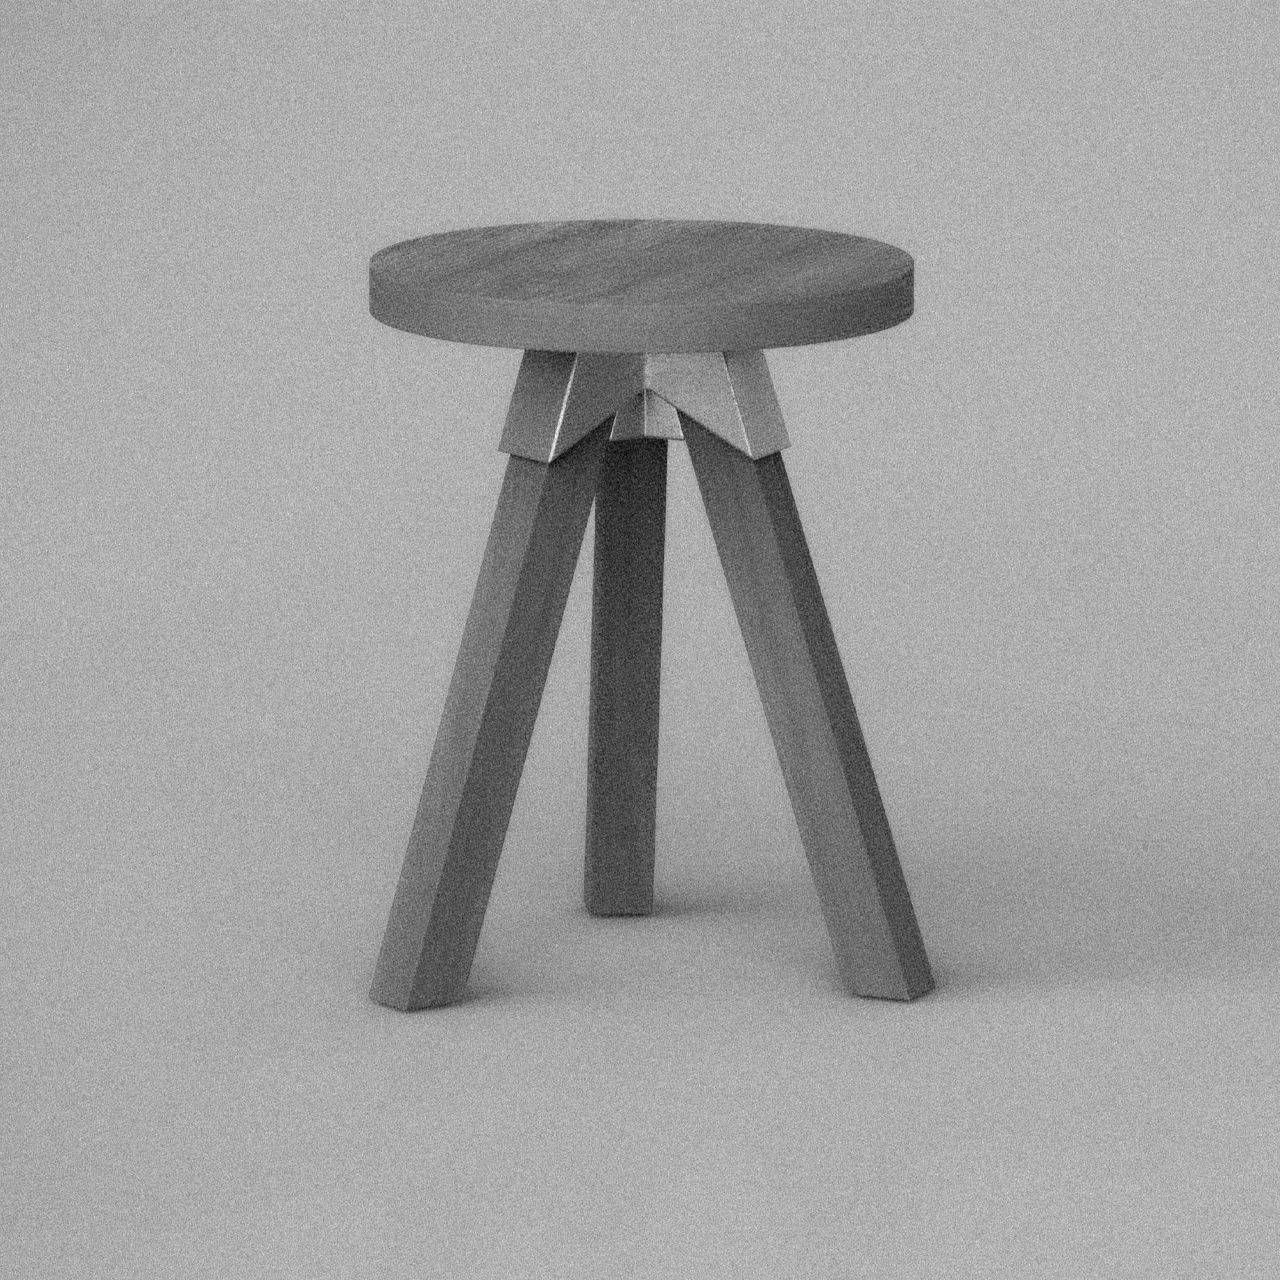 A-joint Stool